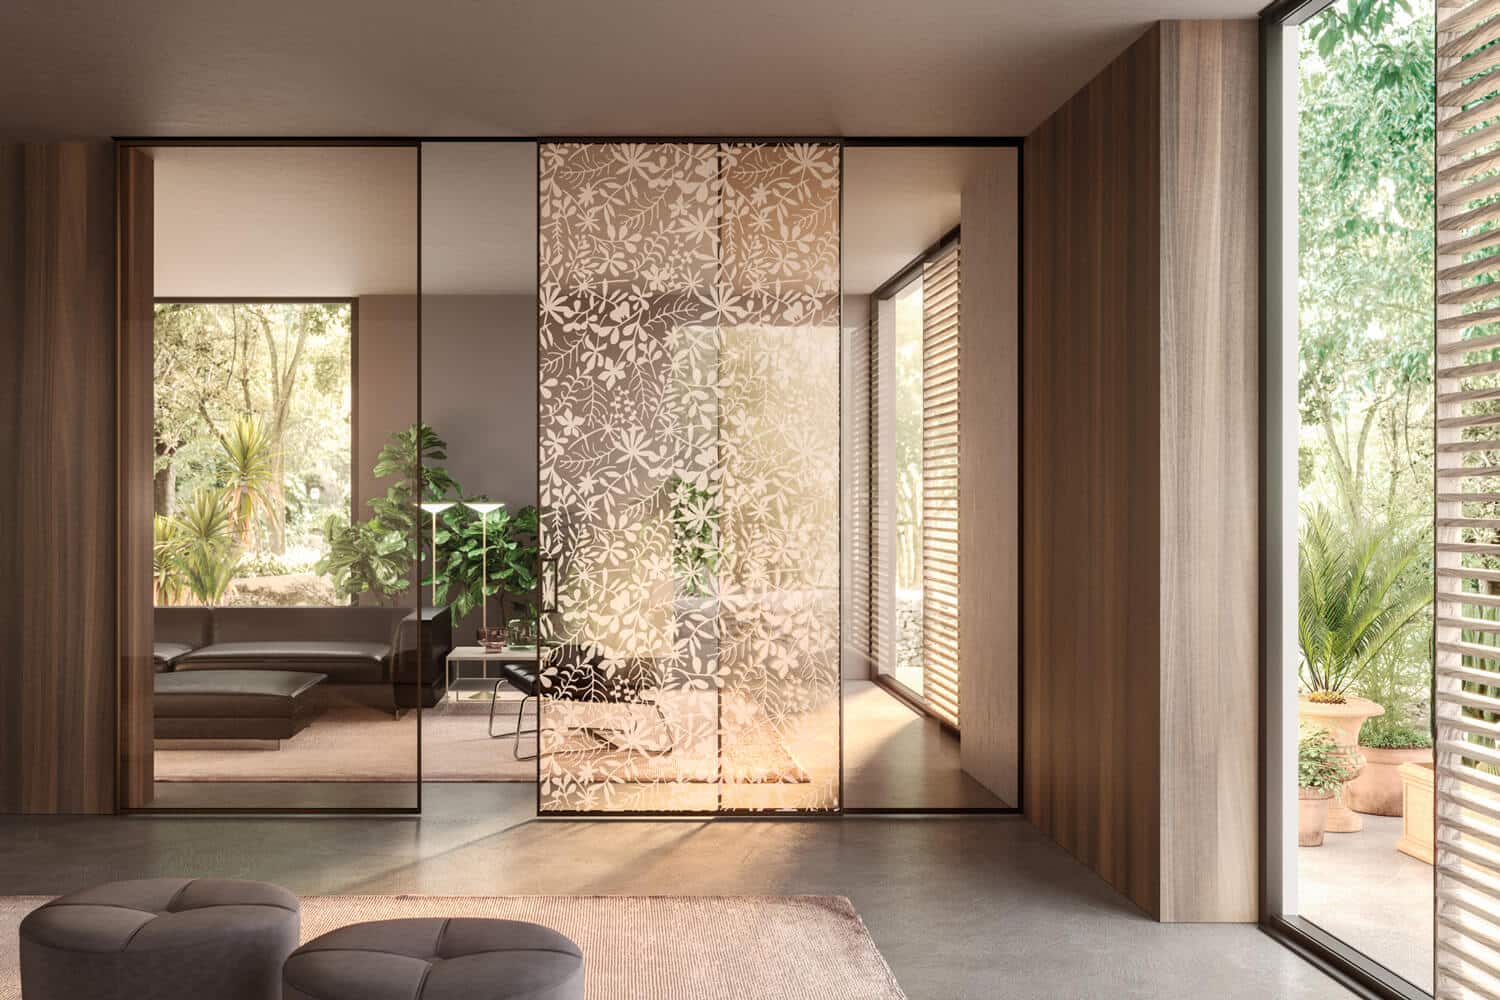 Clear bronze glass doors with Sinfonia decoration; one of the line’s nature-inspired patterns adding movement to the design and “bringing the outside in”.